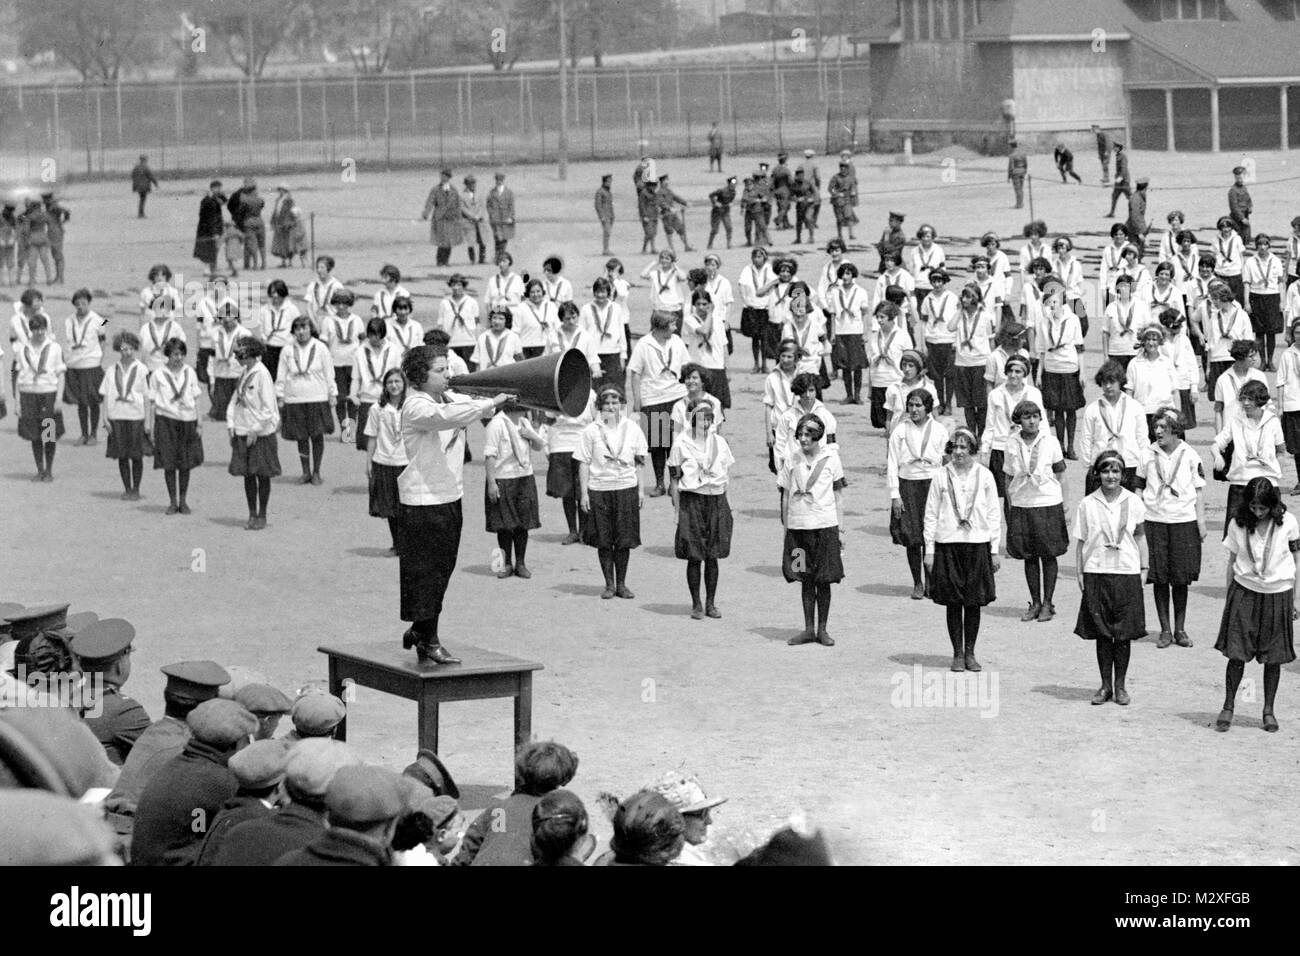 Exercise class for girls on an outdoor athletic field, ca. 1925. Stock Photo